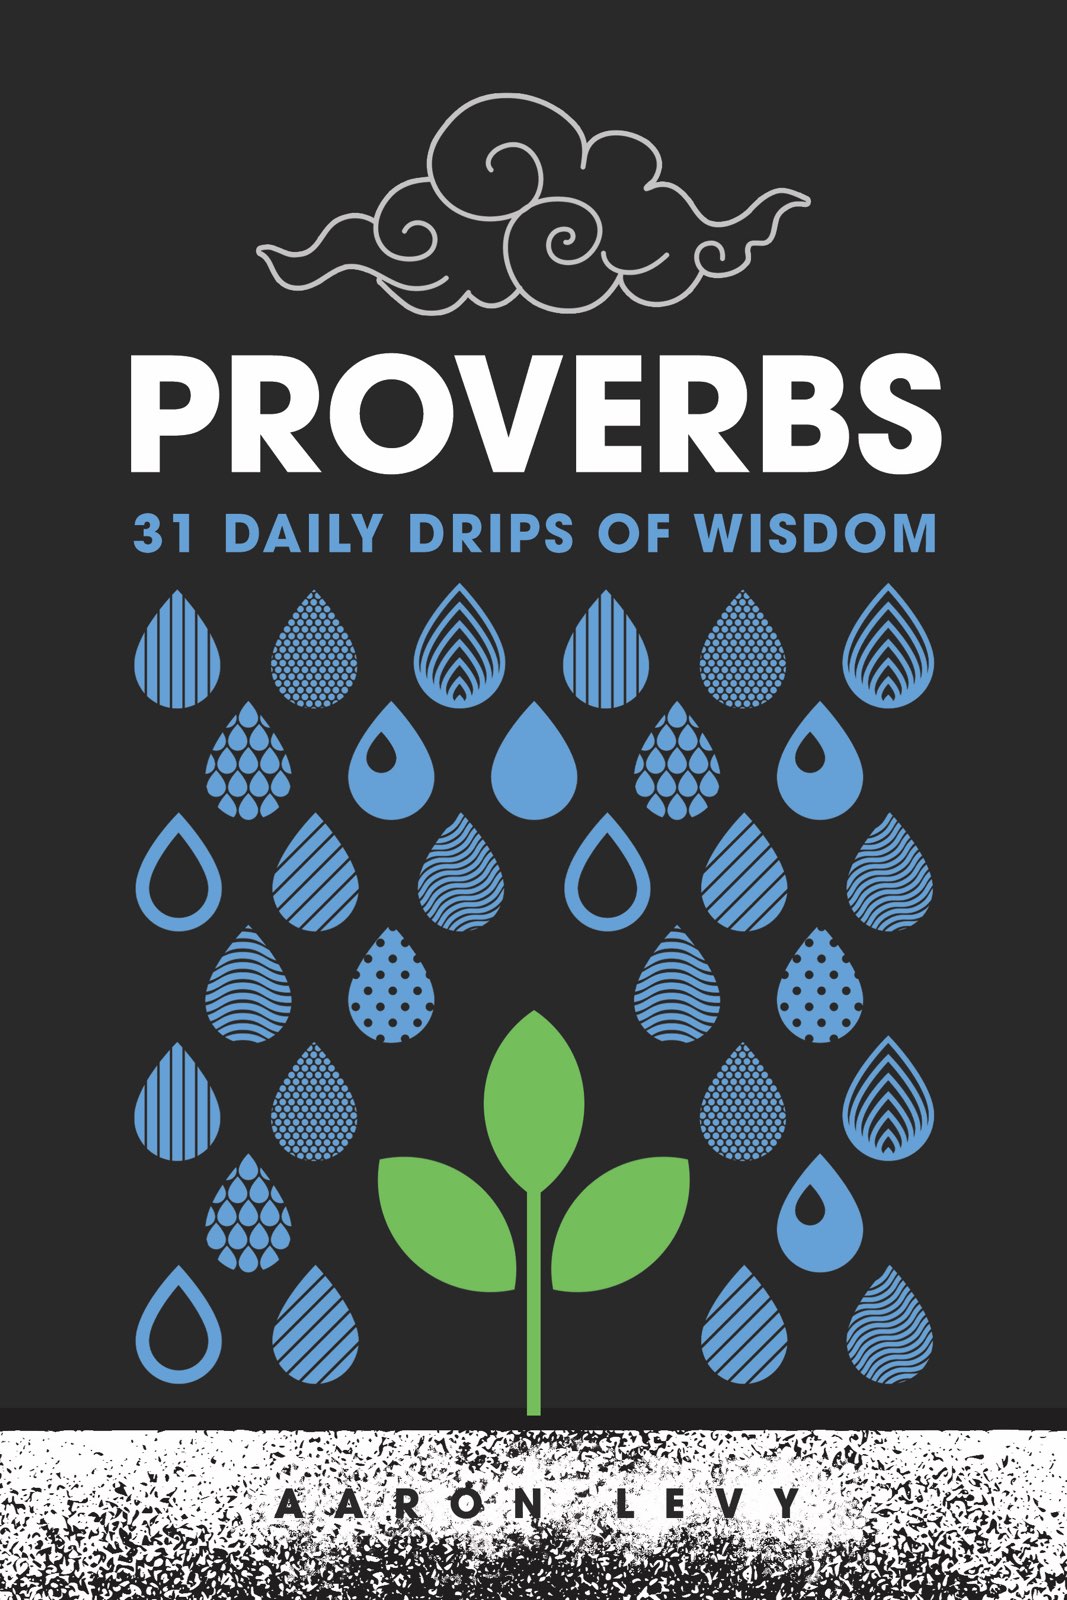 Proverbs - 31 Daily Drips of Wisdom